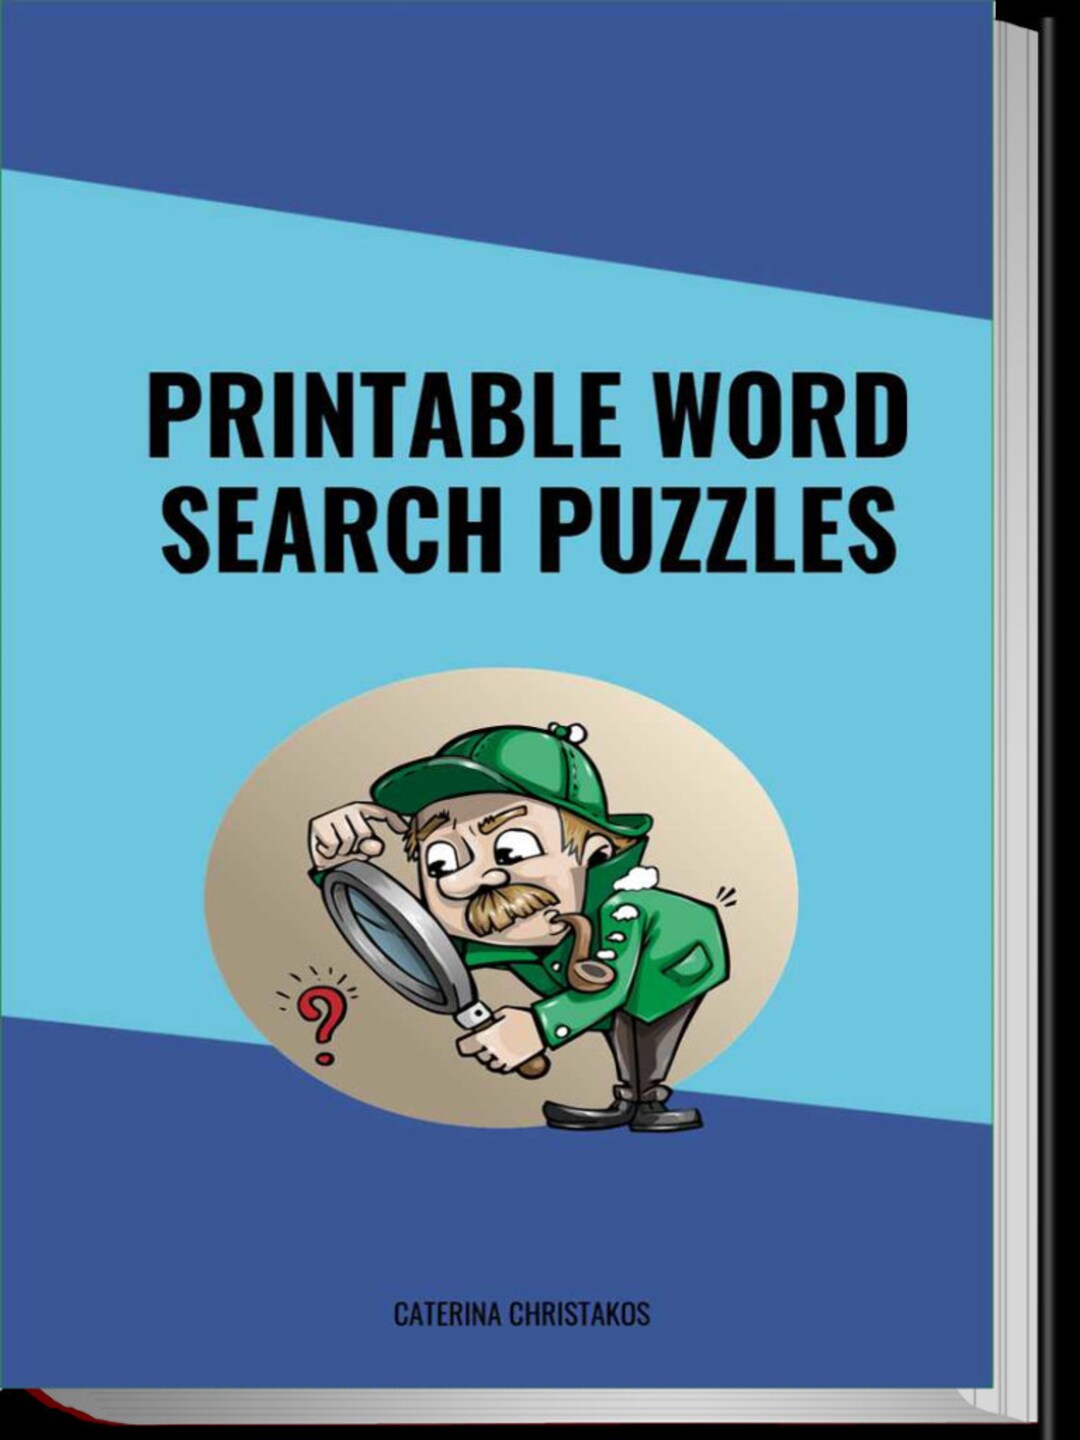 printable-word-search-puzzles-etsy